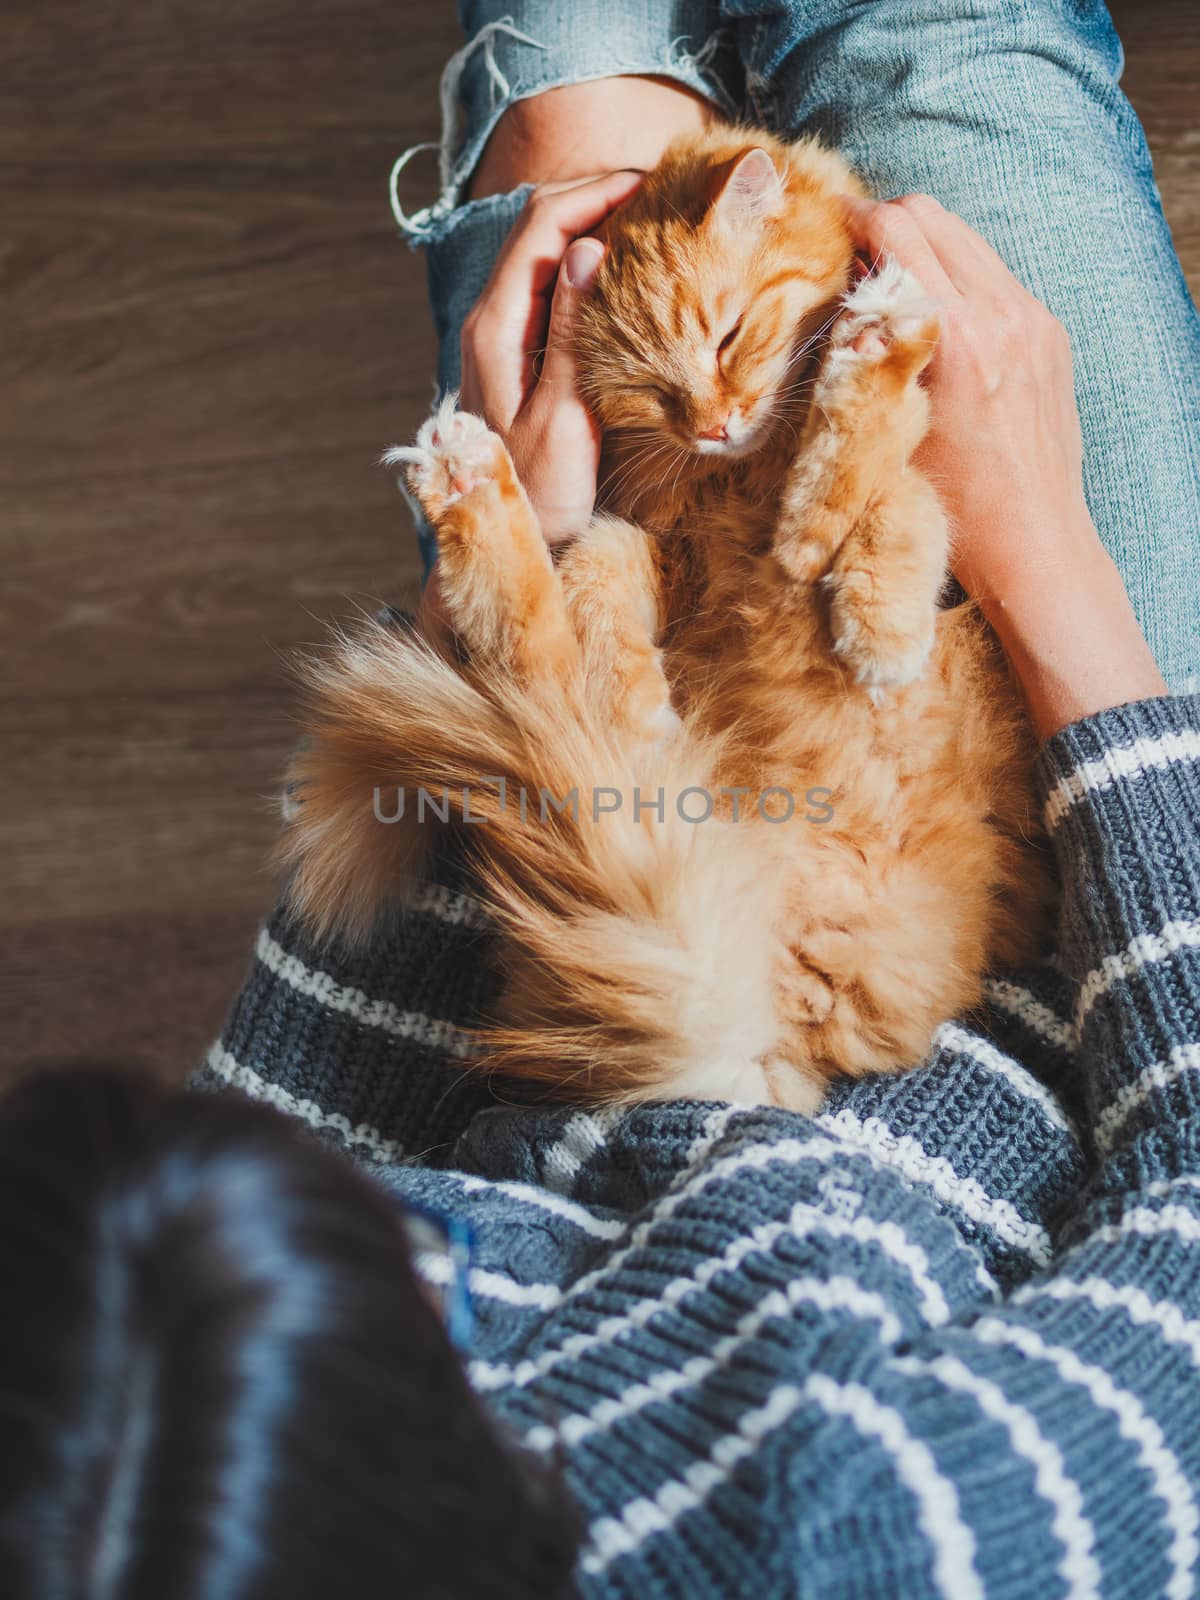 Cute ginger cat dozing on woman knees. Woman in torn jeans stroking her fluffy pet. Cozy home. Top view.